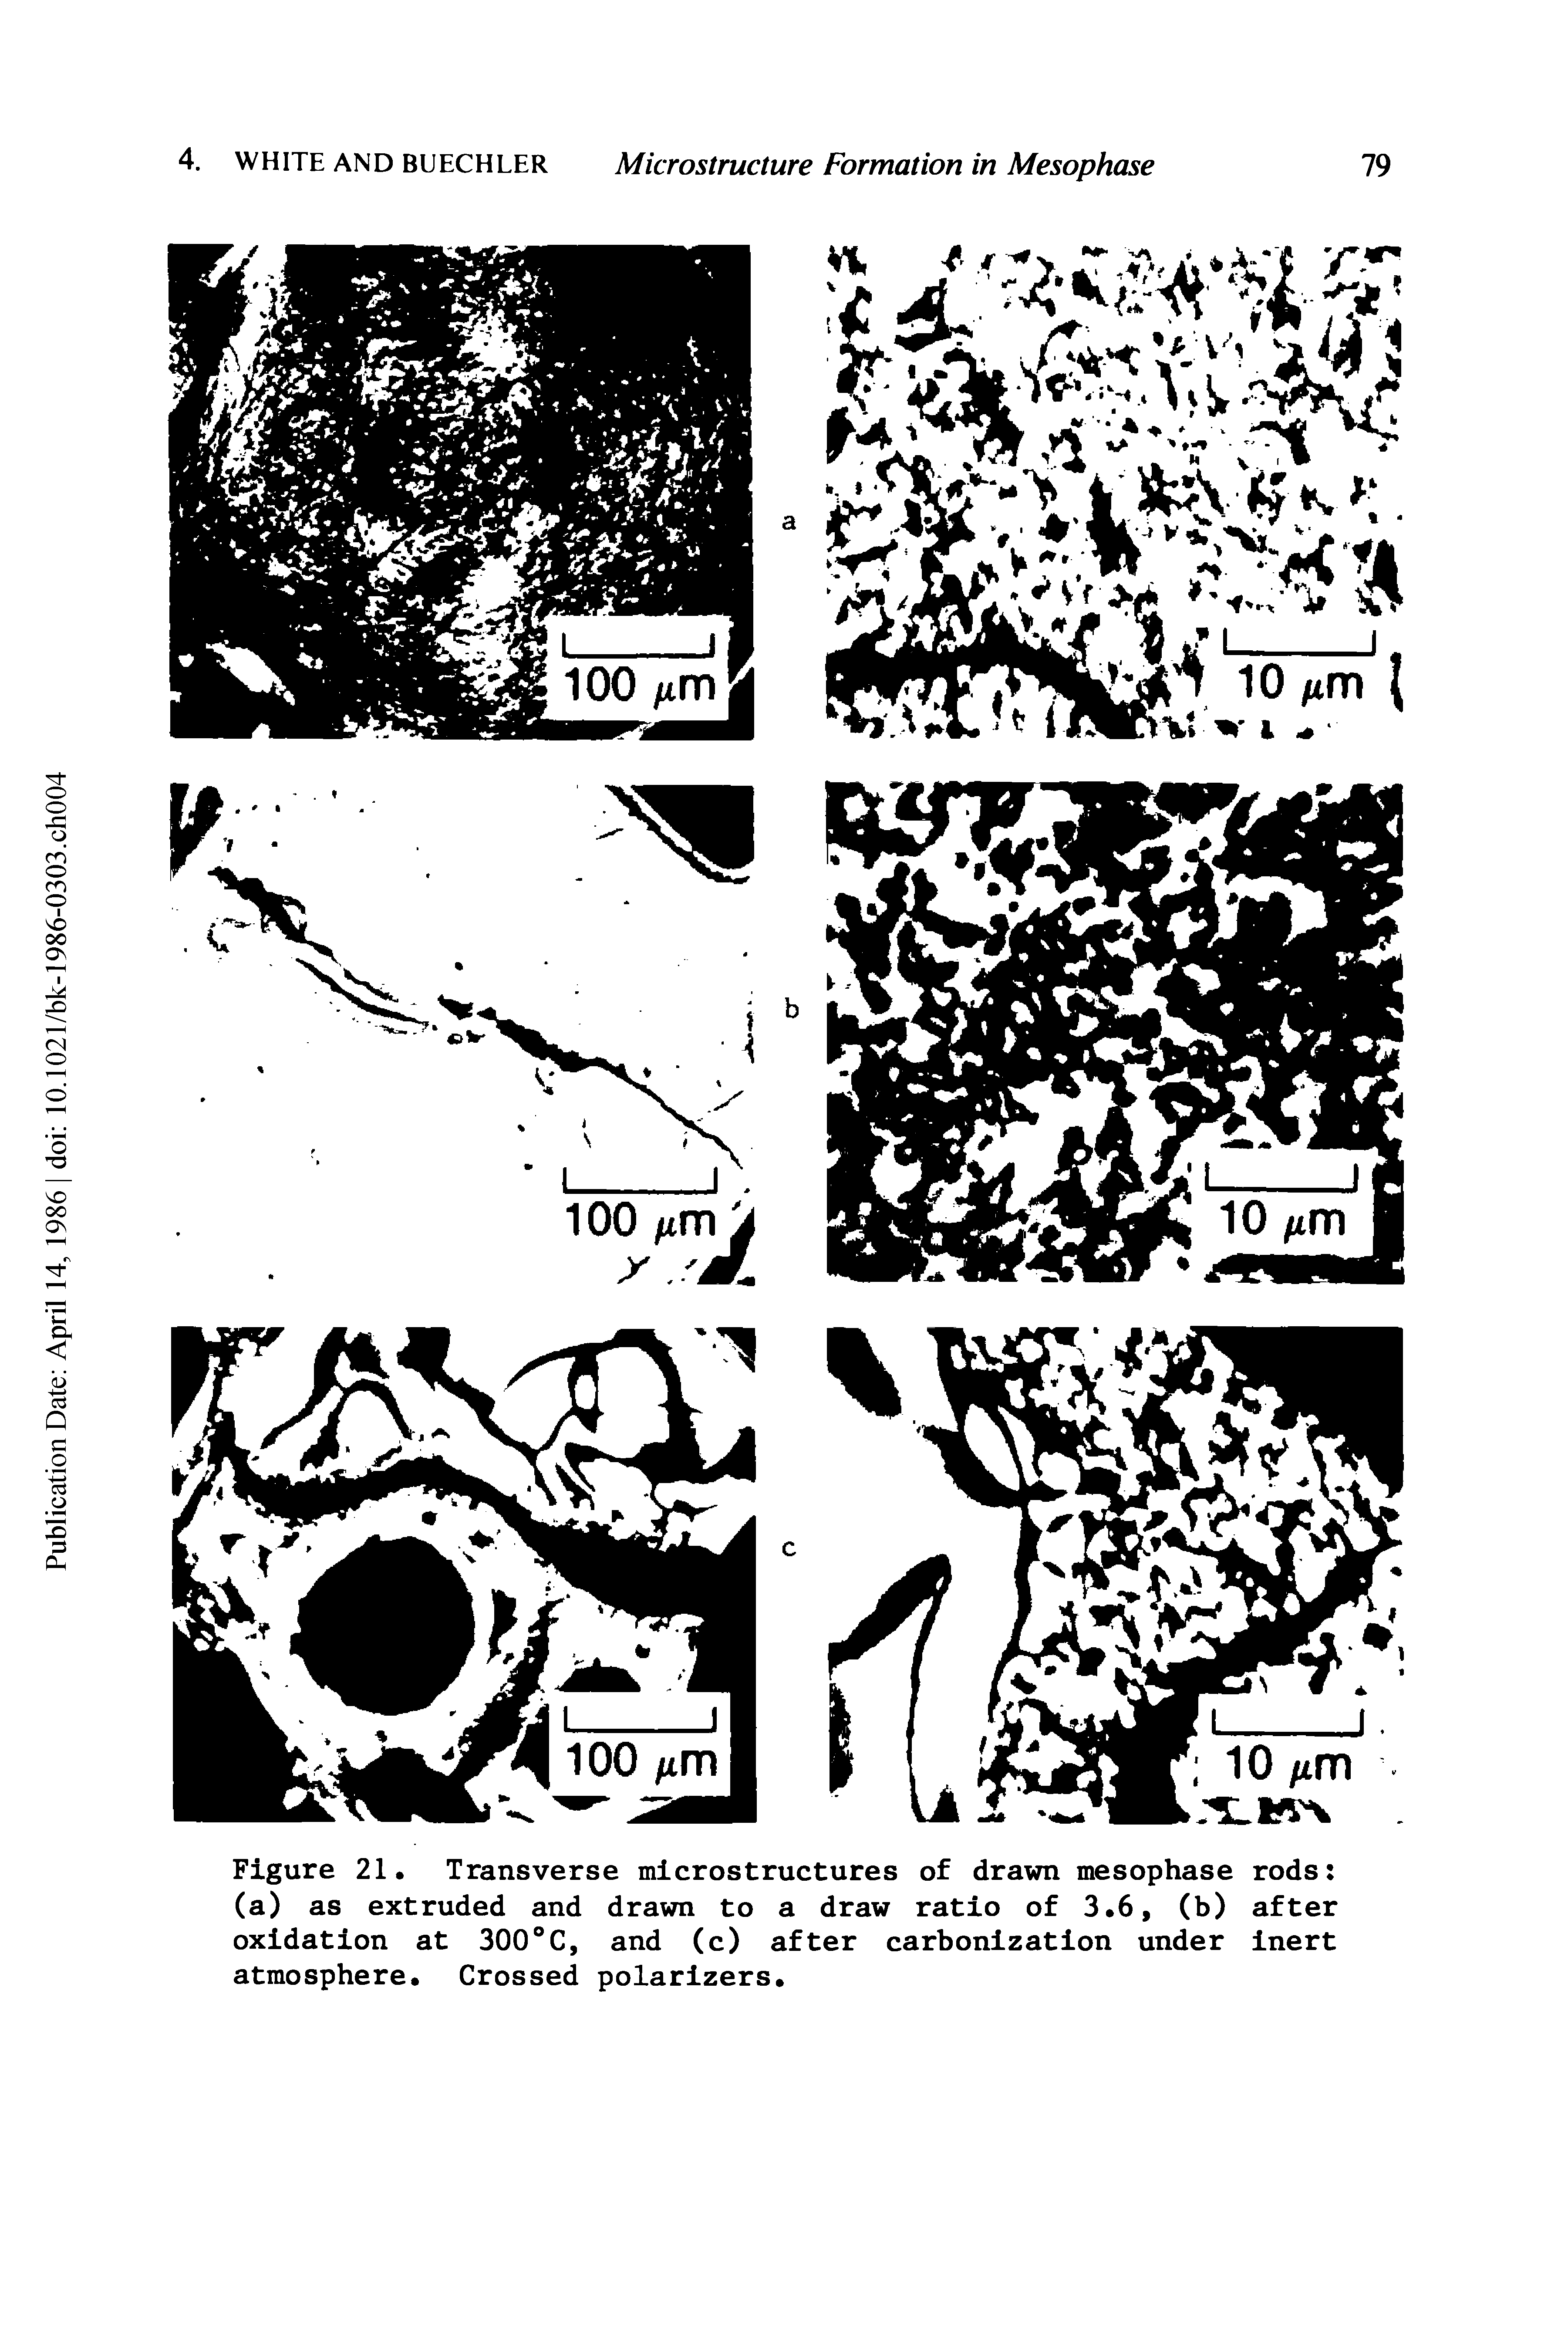 Figure 21. Transverse microstructures of drawn mesophase rods (a) as extruded and drawn to a draw ratio of 3.6, (b) after oxidation at 300°C, and (c) after carbonization under inert atmosphere. Crossed polarizers.